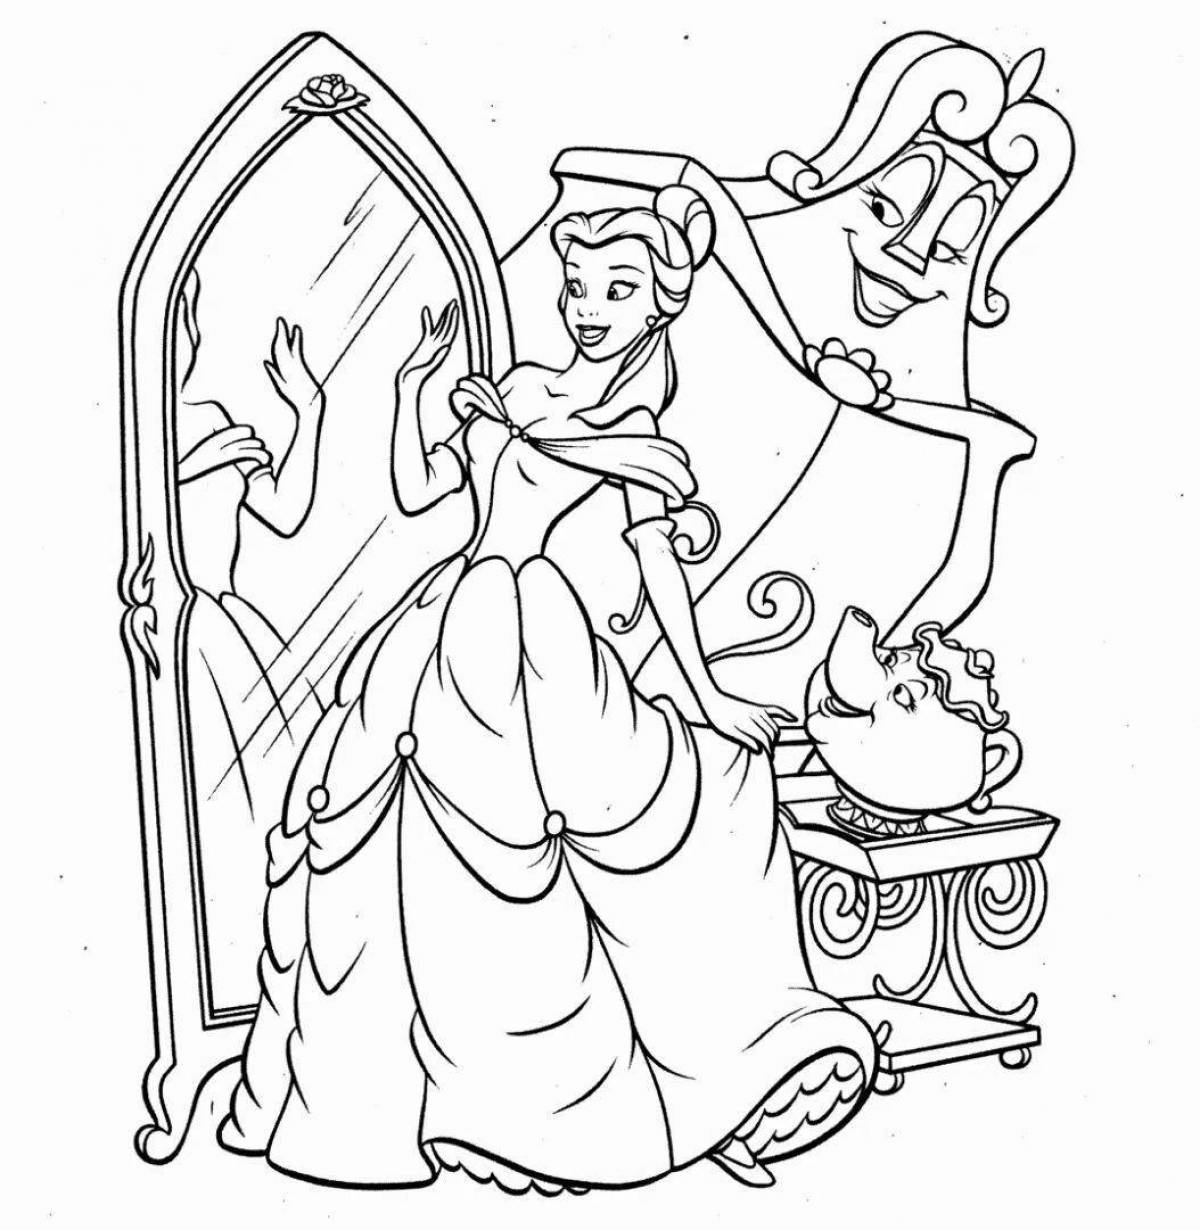 Exotic beauty and the beast coloring pages for kids